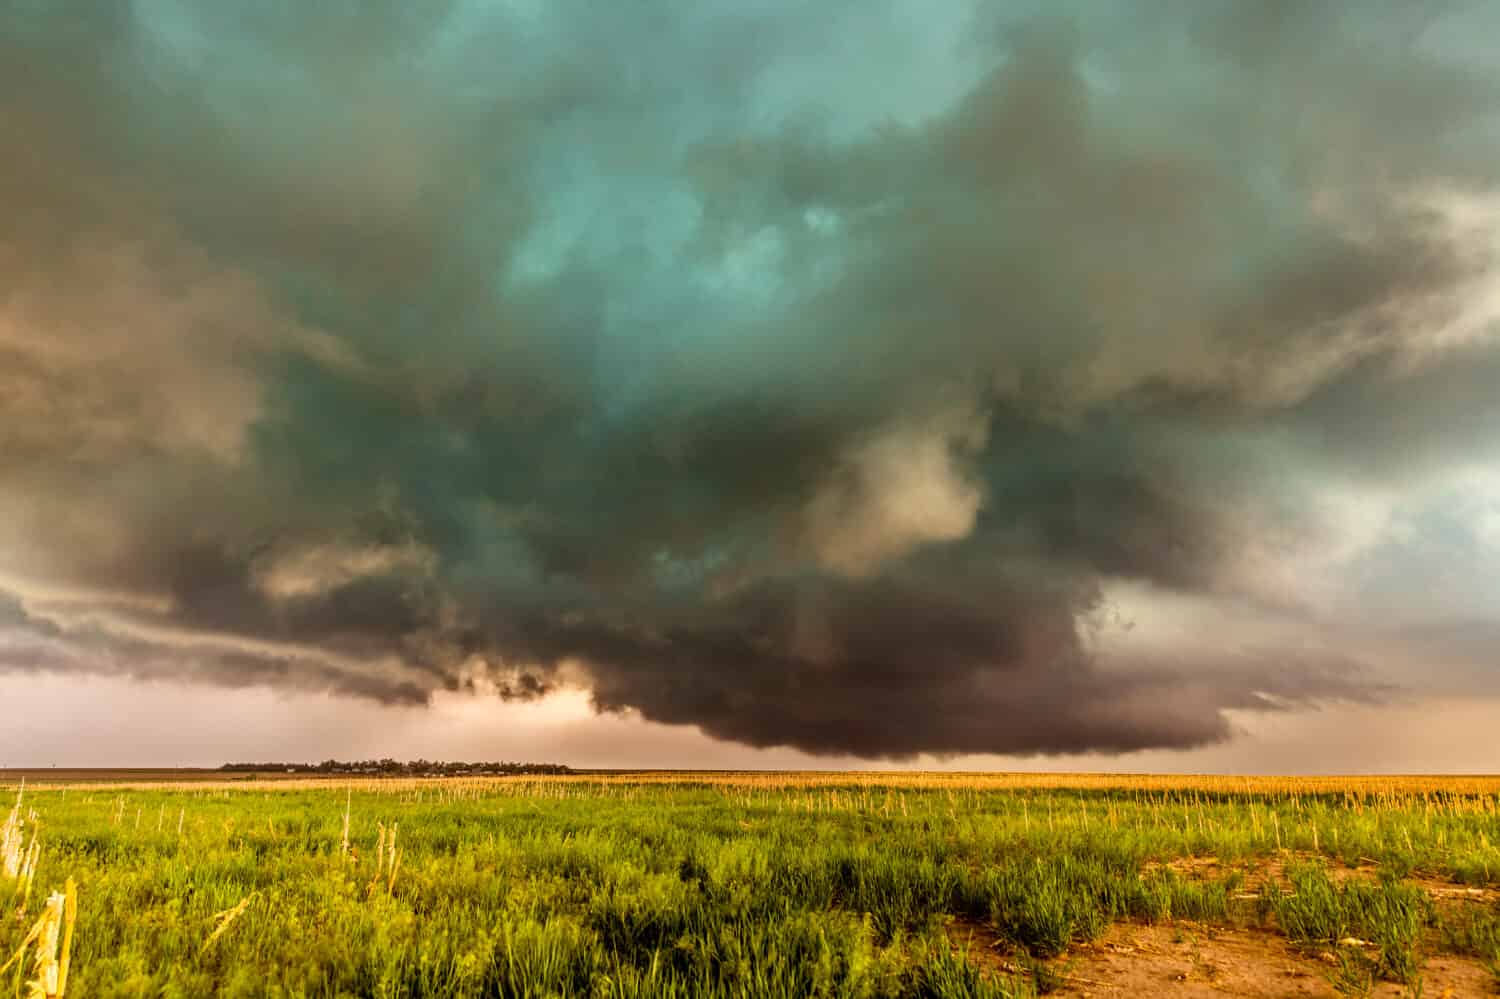 A large tornadic mesocyclone supercell inflow with a green glow of hail sucks in energy as it begins to transform into a tornado.